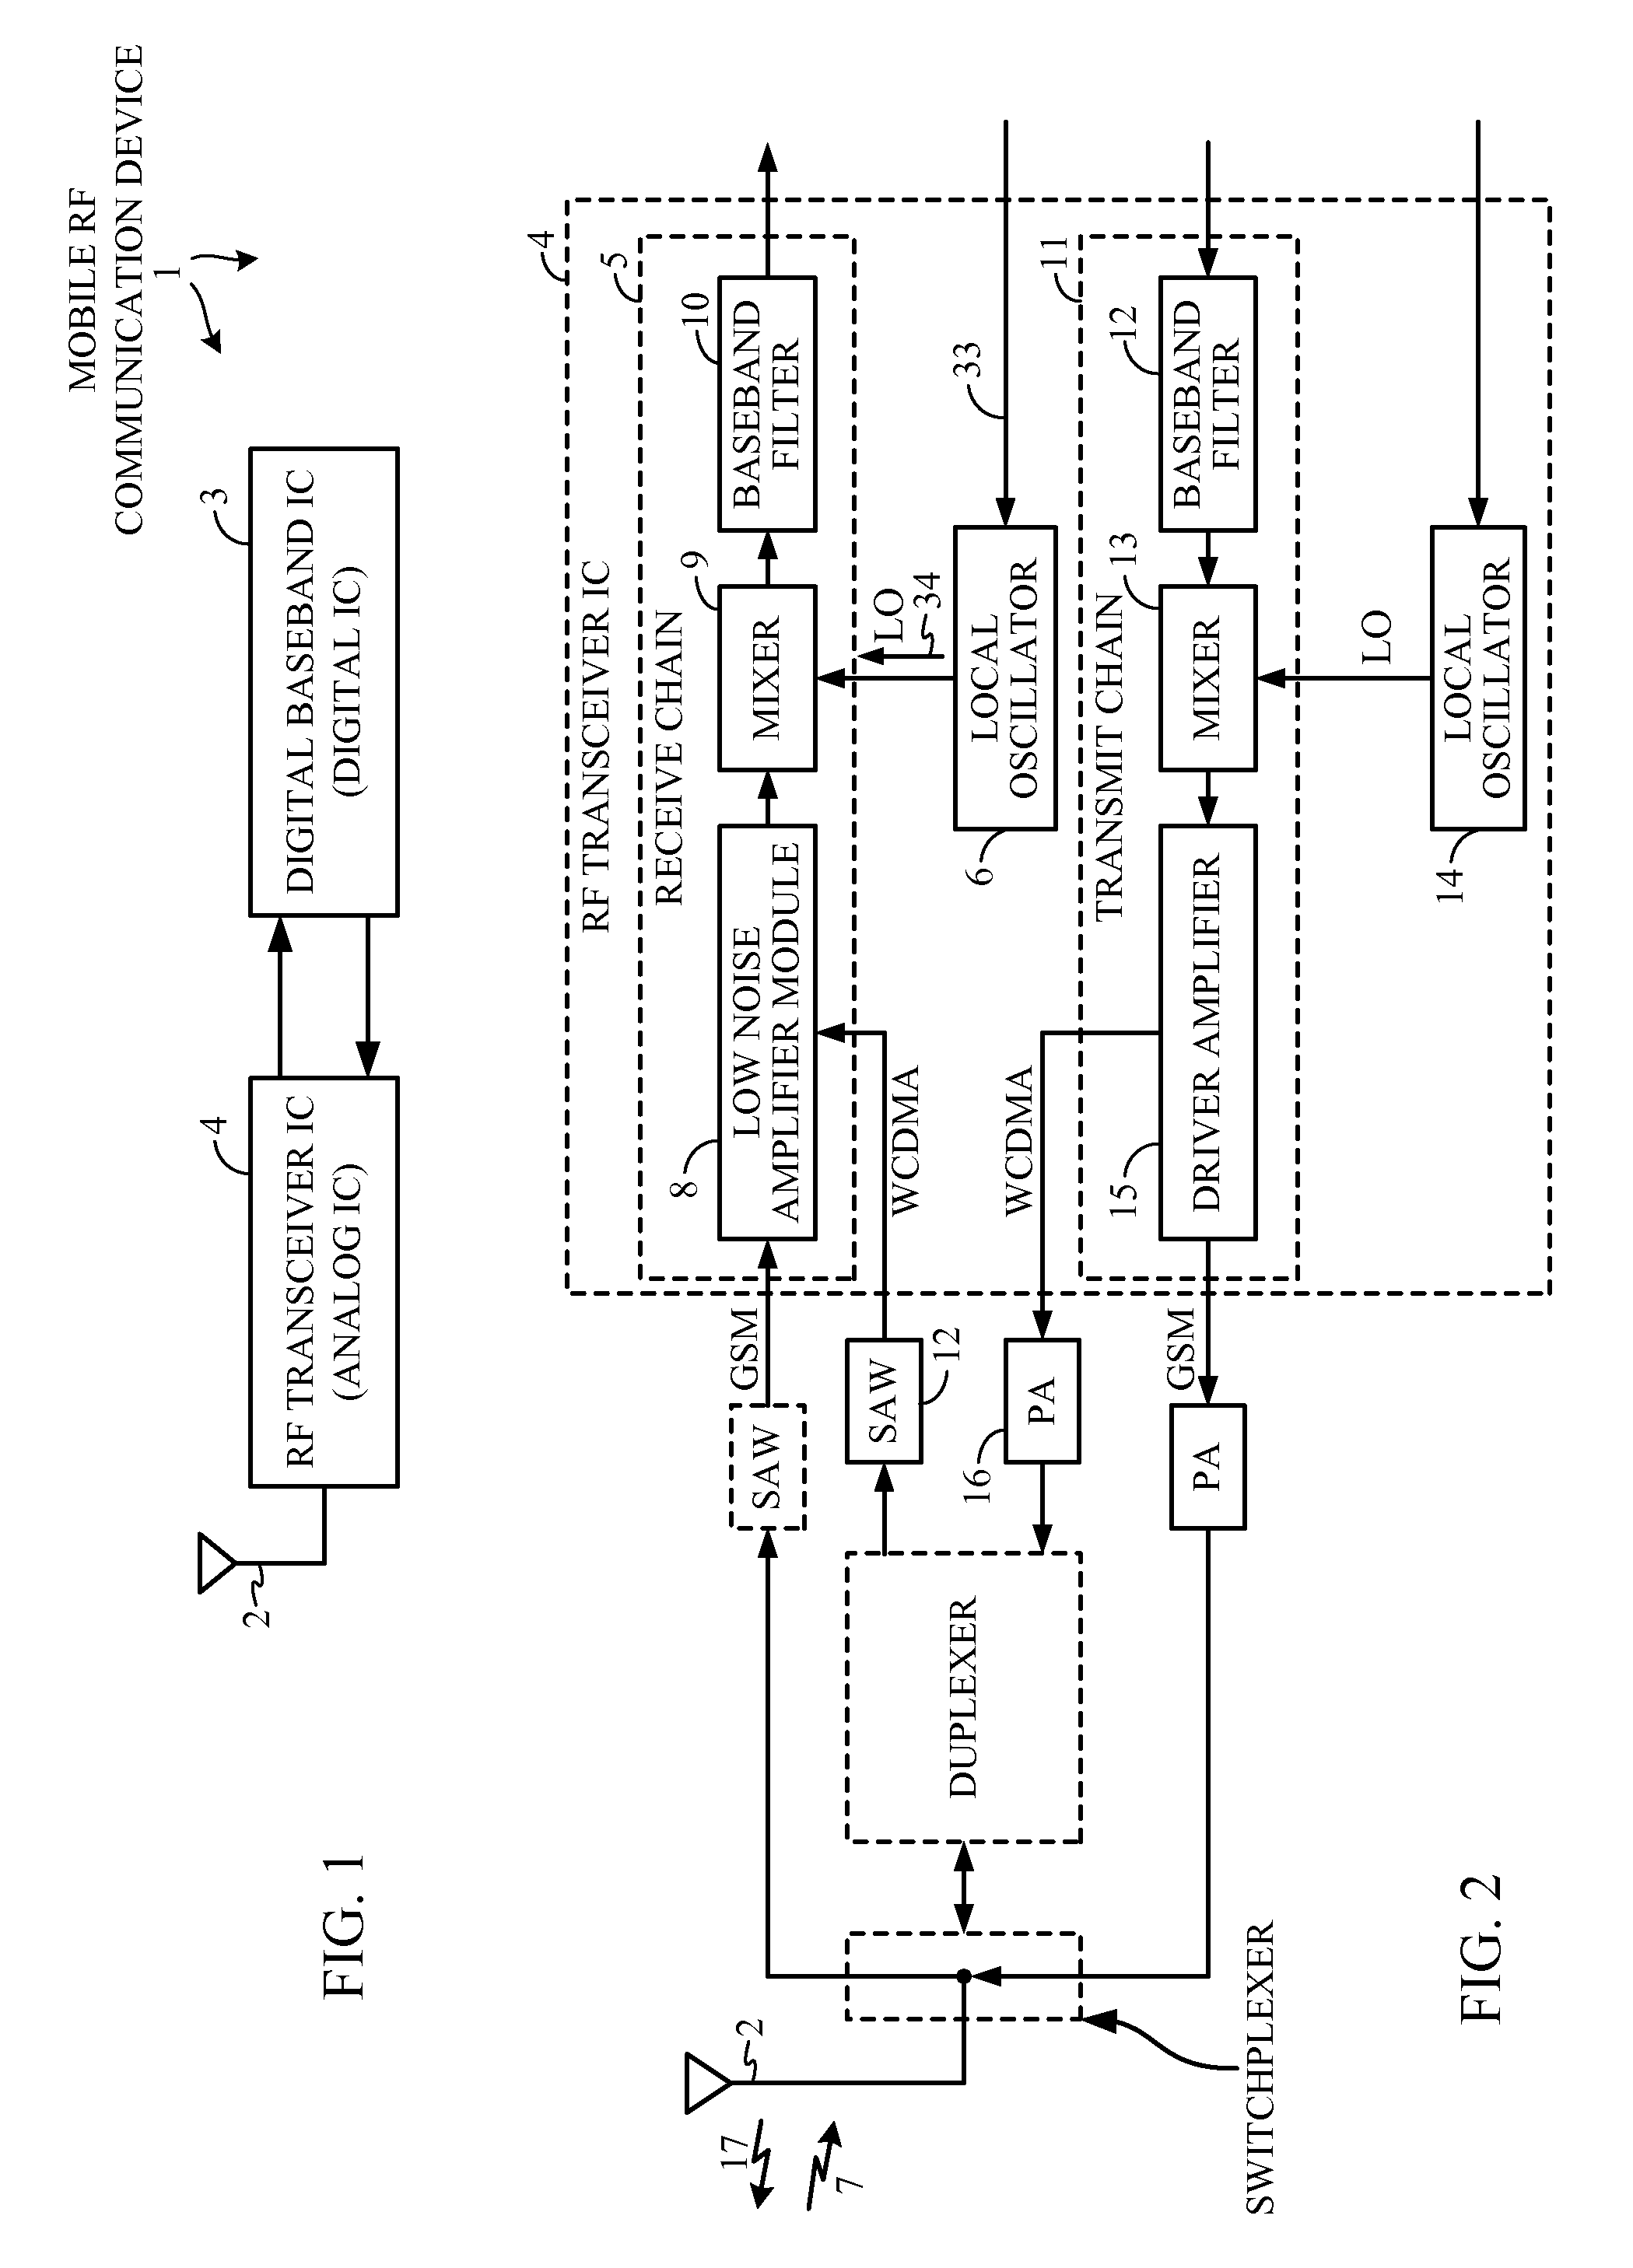 Dynamic biasing of a vco in a phase-locked loop